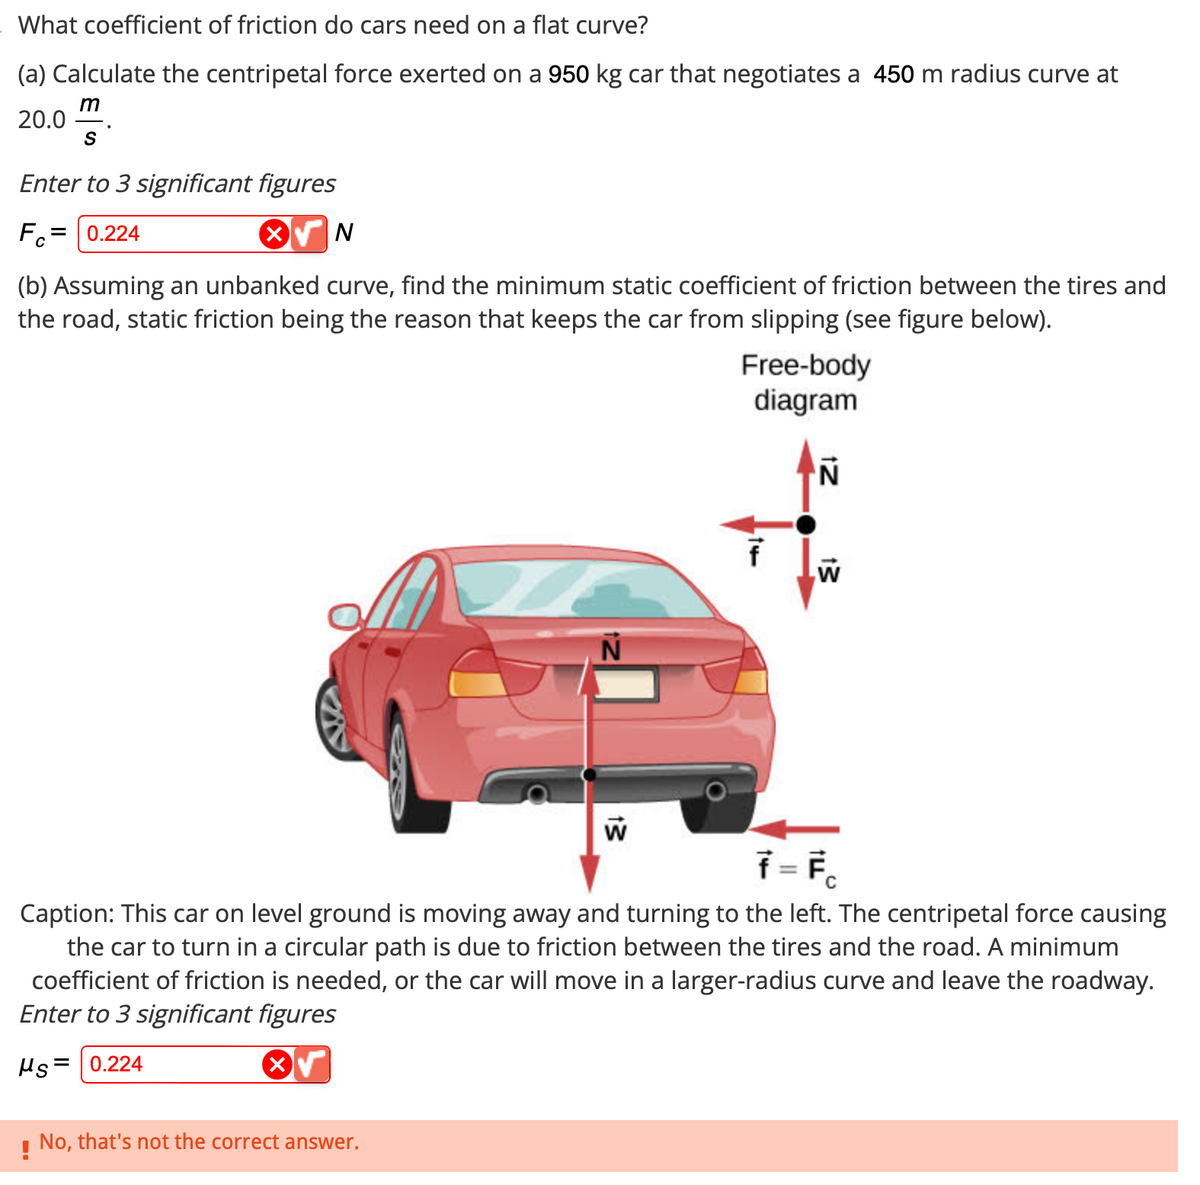 What coefficient of friction do cars need on a flat curve?
(a) Calculate the centripetal force exerted on a 950 kg car that negotiates a 450 m radius curve at
m
20.0
S
Enter to 3 significant figures
Fo 0.224
N
(b) Assuming an unbanked curve, find the minimum static coefficient of friction between the tires and
the road, static friction being the reason that keeps the car from slipping (see figure below).
W
!
No, that's not the correct answer.
Free-body
diagram
f
N
W
ƒ = F
Caption: This car on level ground is moving away and turning to the left. The centripetal force causing
the car to turn in a circular path is due to friction between the tires and the road. A minimum
coefficient of friction is needed, or the car will move in a larger-radius curve and leave the roadway.
Enter to 3 significant figures
Hs= 0.224
√